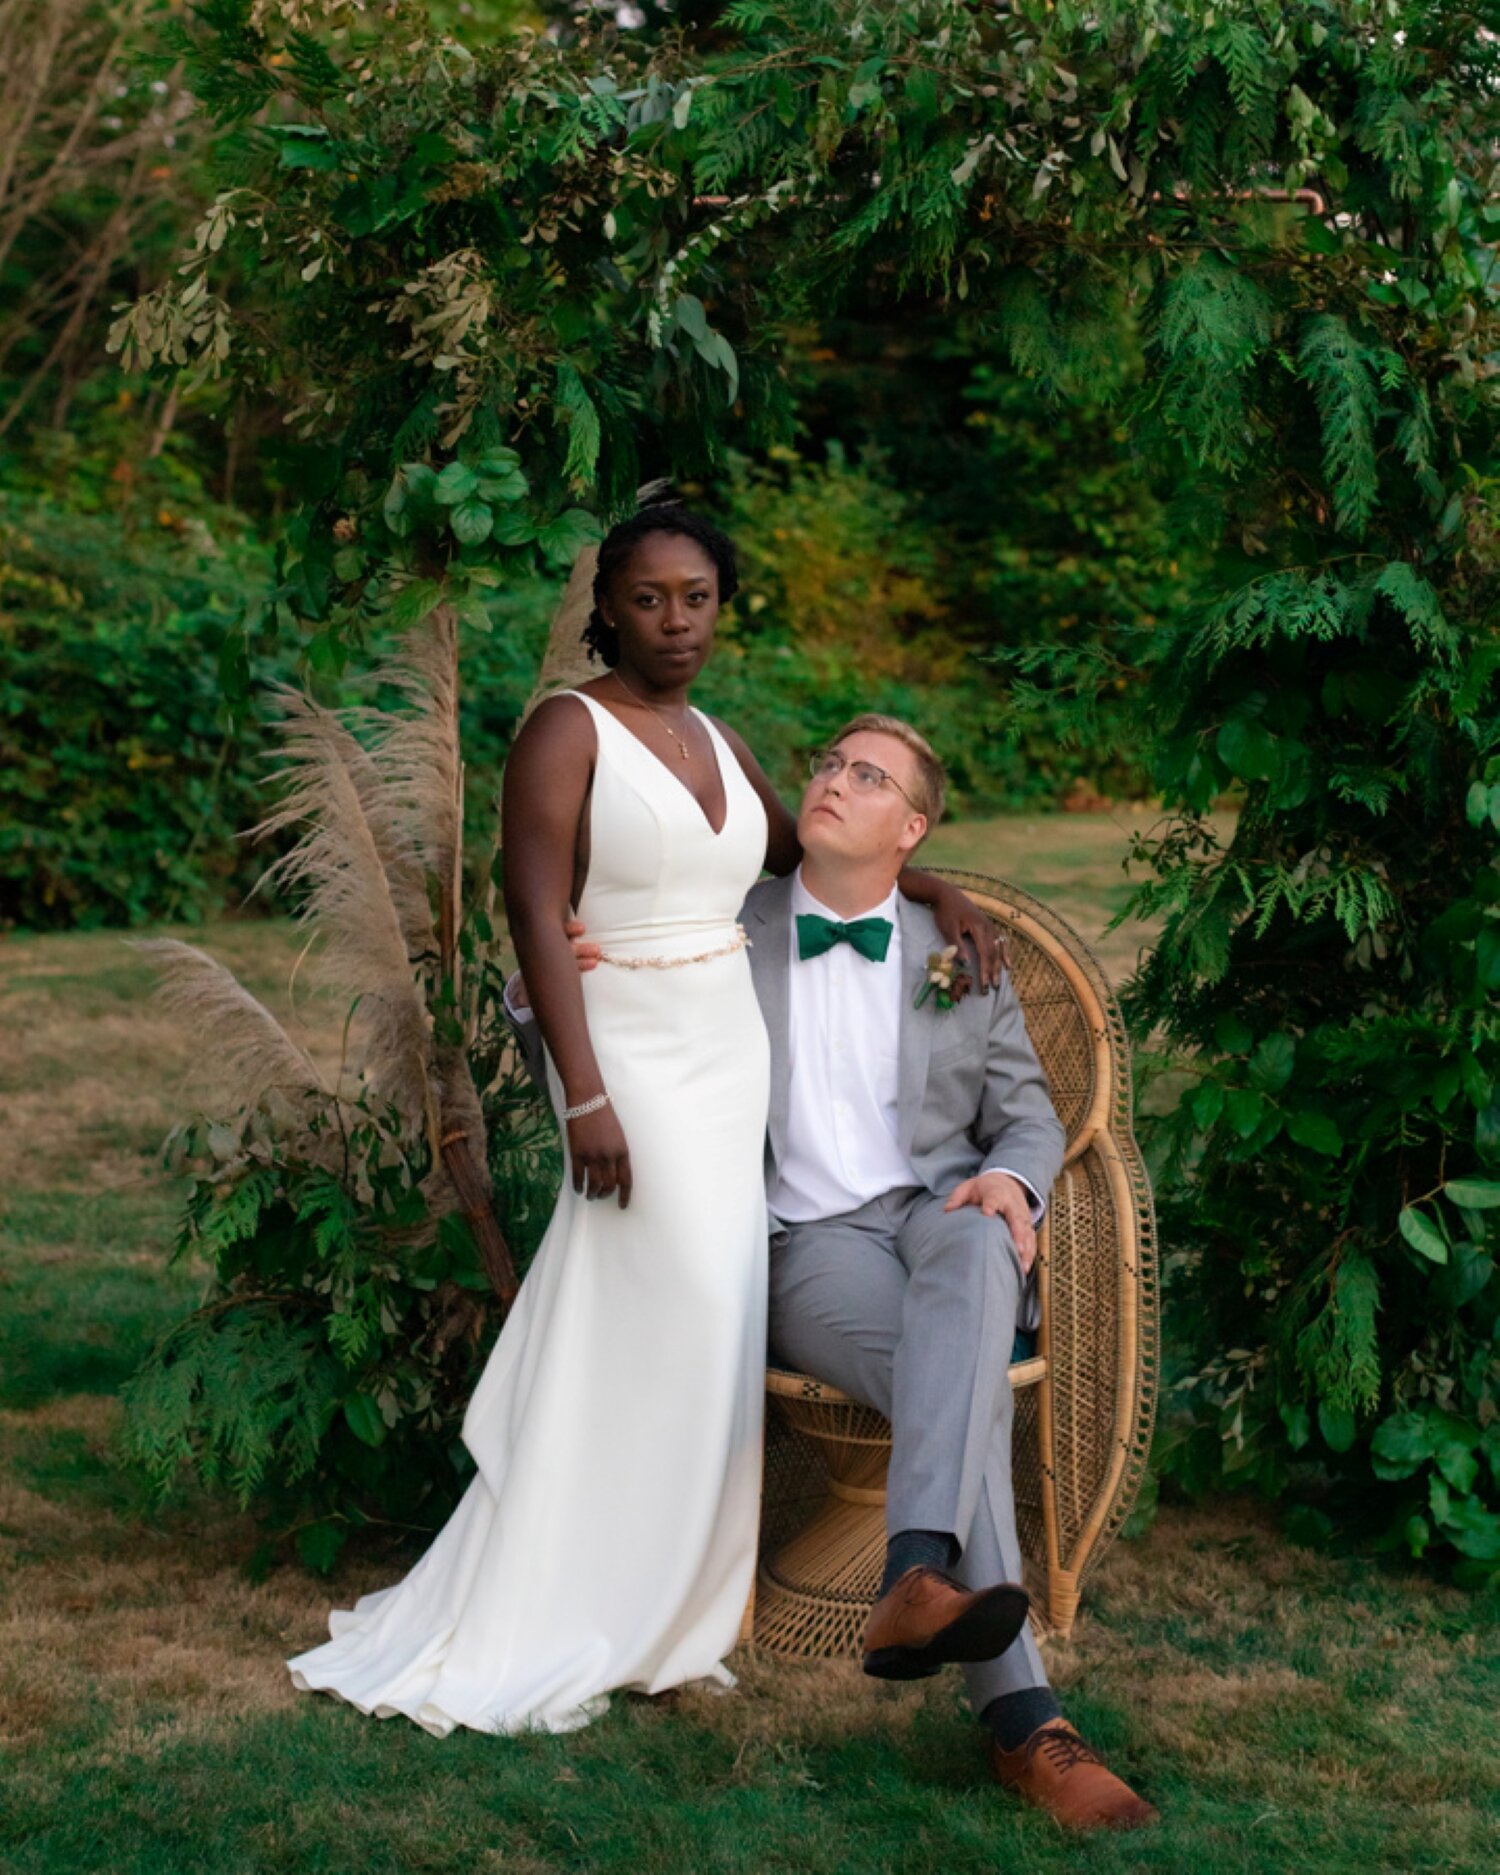 Real Wedding in the Pacific Northwest with Beautiful Black Bride and Foliage Ceremony Arch